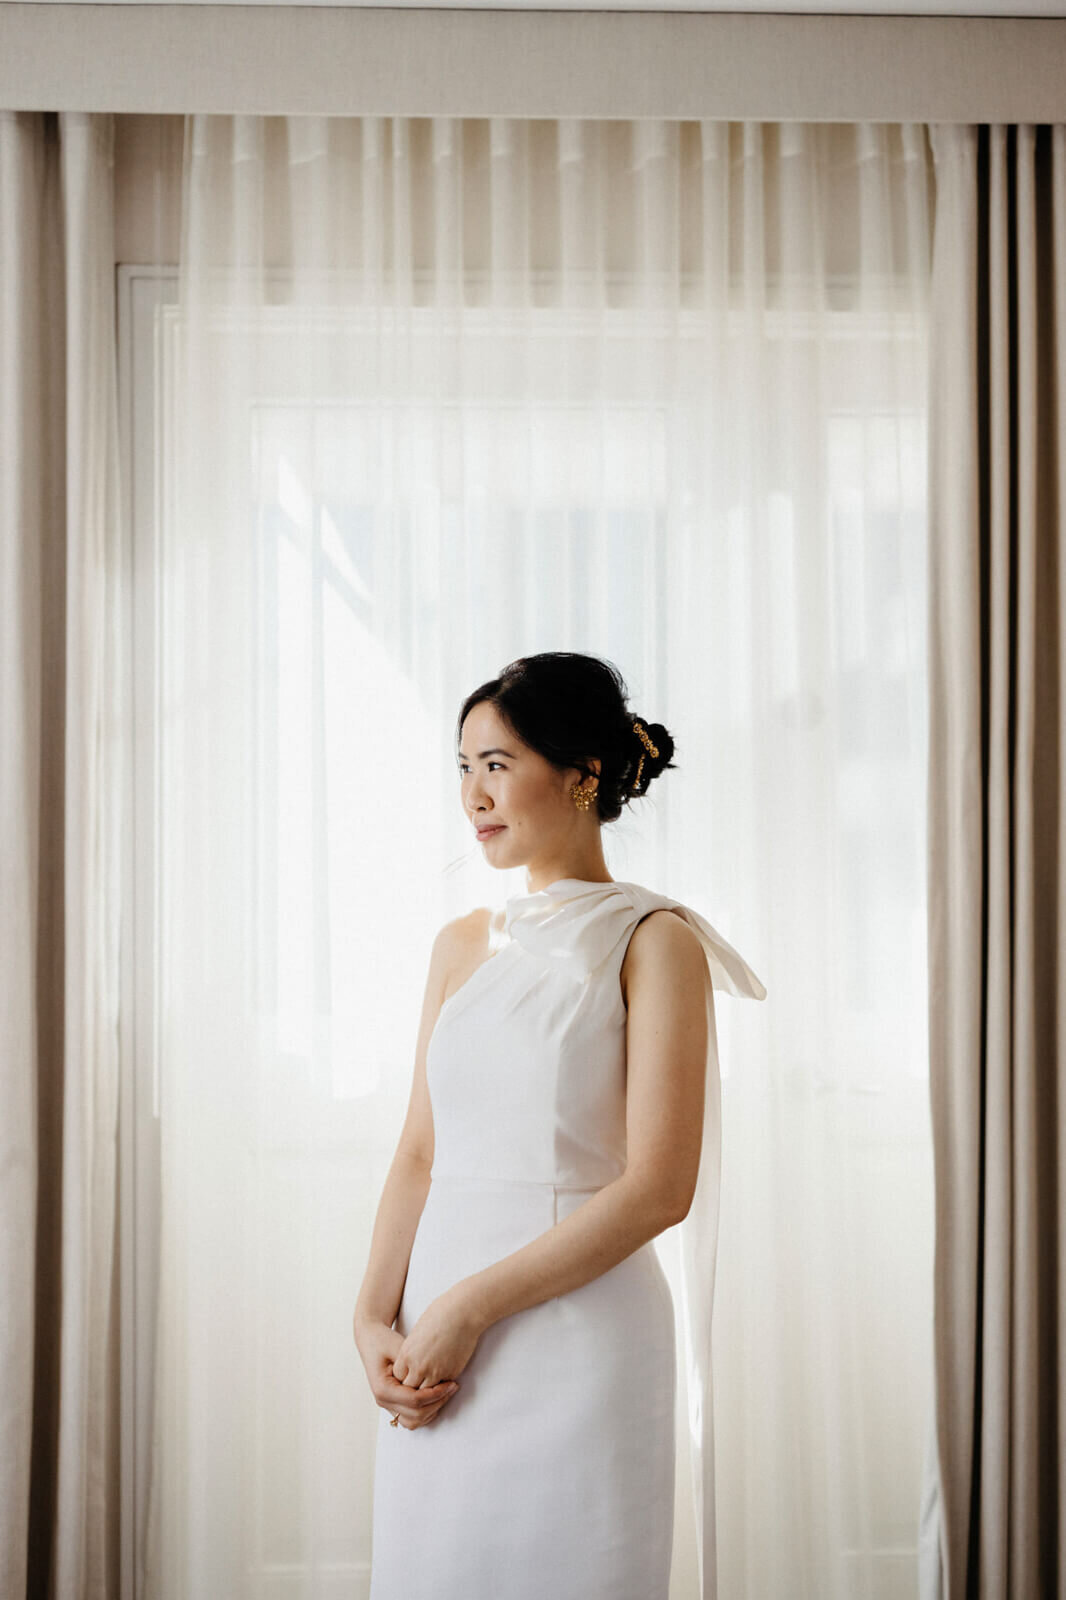 The bride, whose hands are clenched together, is standing while looking sideways in front of a  window with an off-white curtain